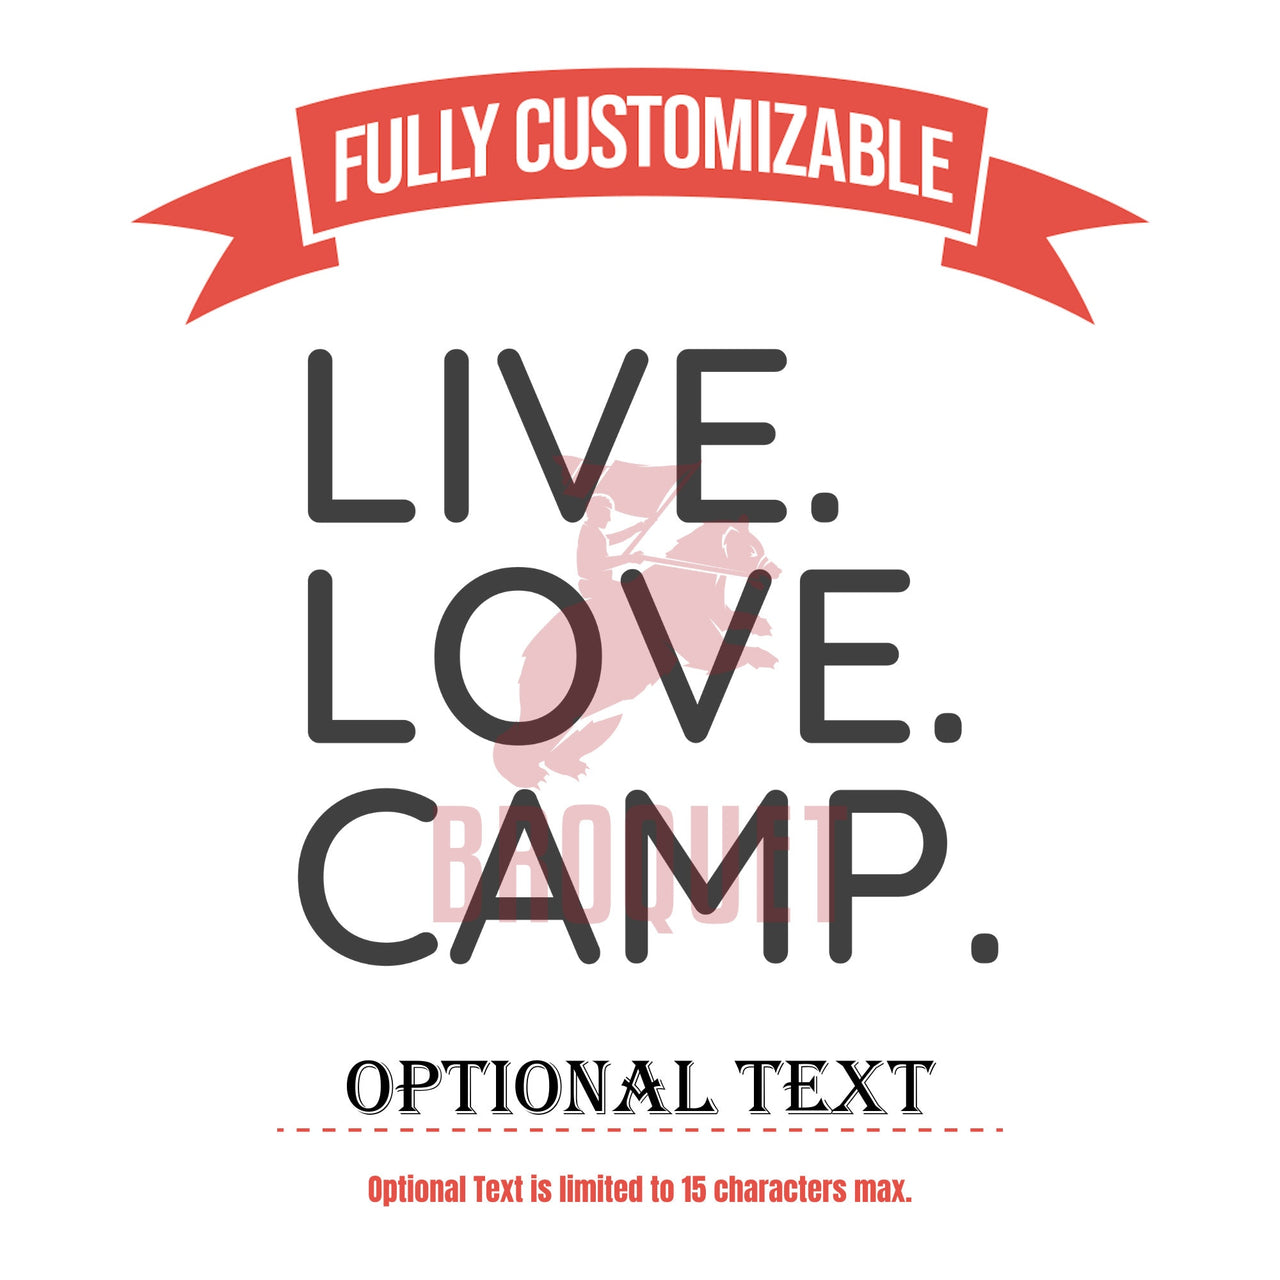 Live Love Camp Personalized Tumbler Camping Gift, Gifts for Camper Outdoor Tumblers, Custom Tumbler Trendy Camping Travel Mugs, CRU Cups